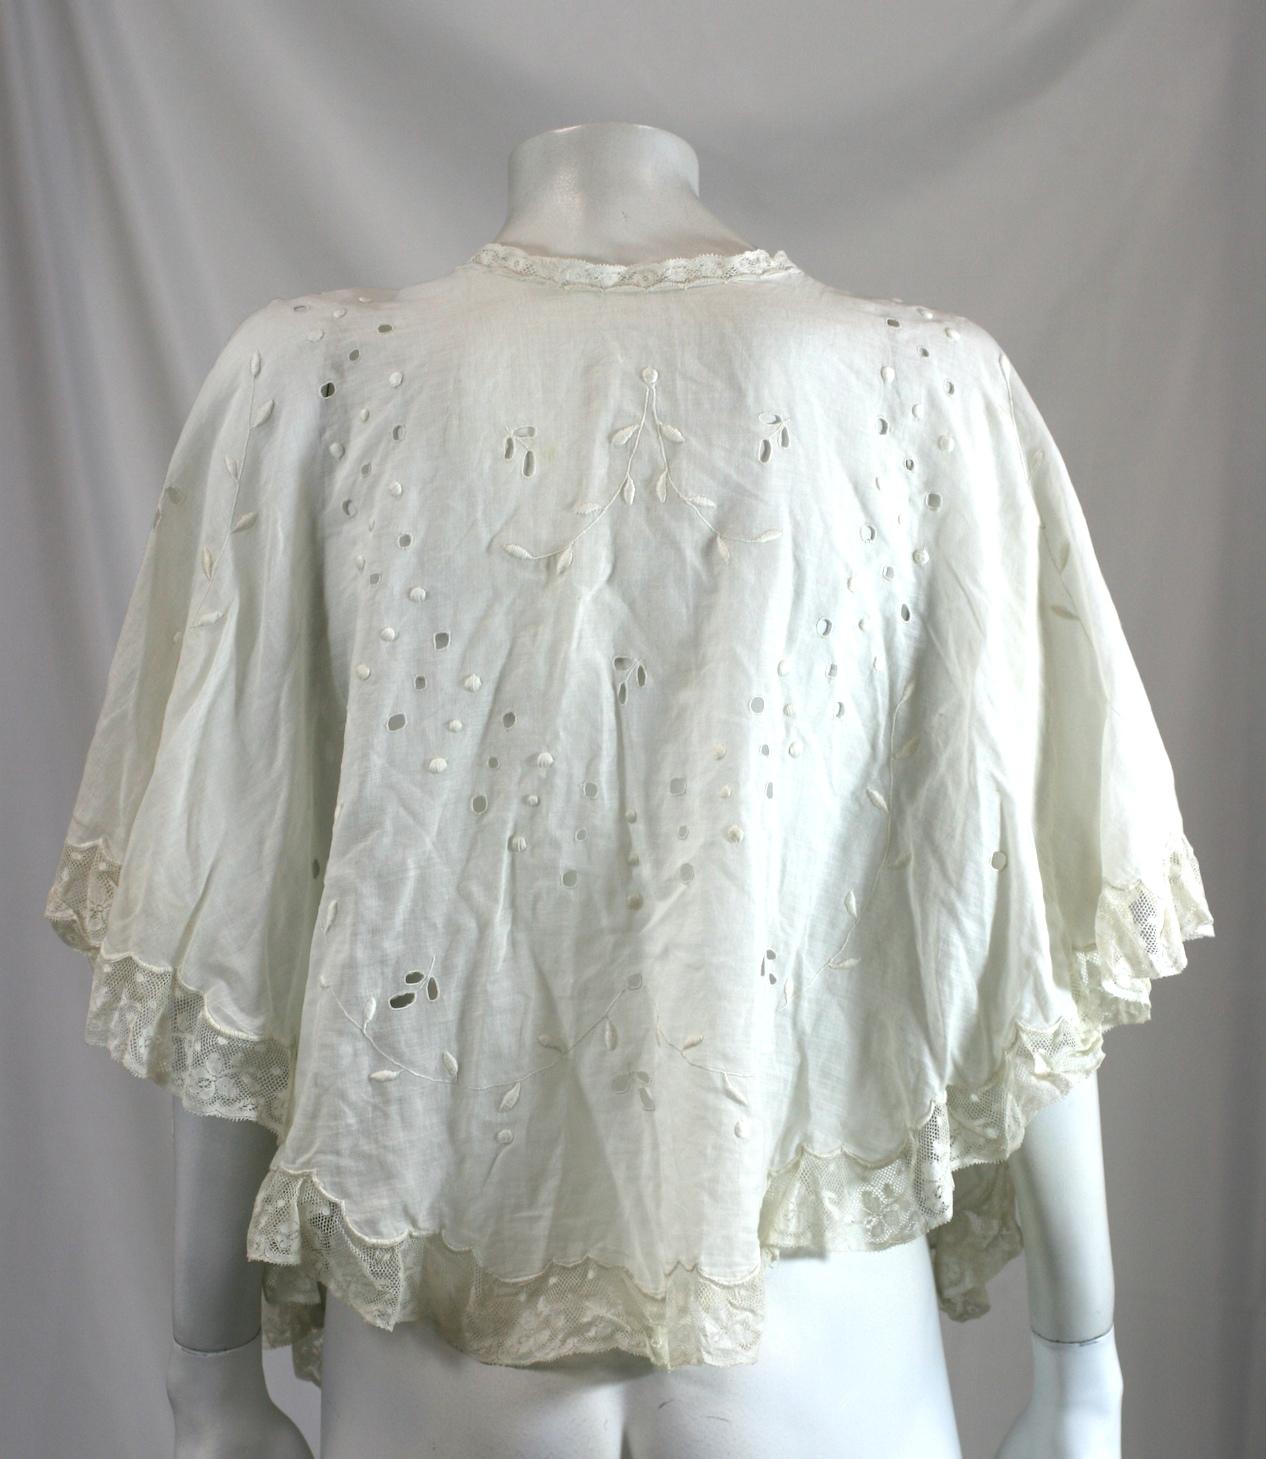 Studio VL Upcycled Edwardian Batiste Cape In Excellent Condition For Sale In New York, NY